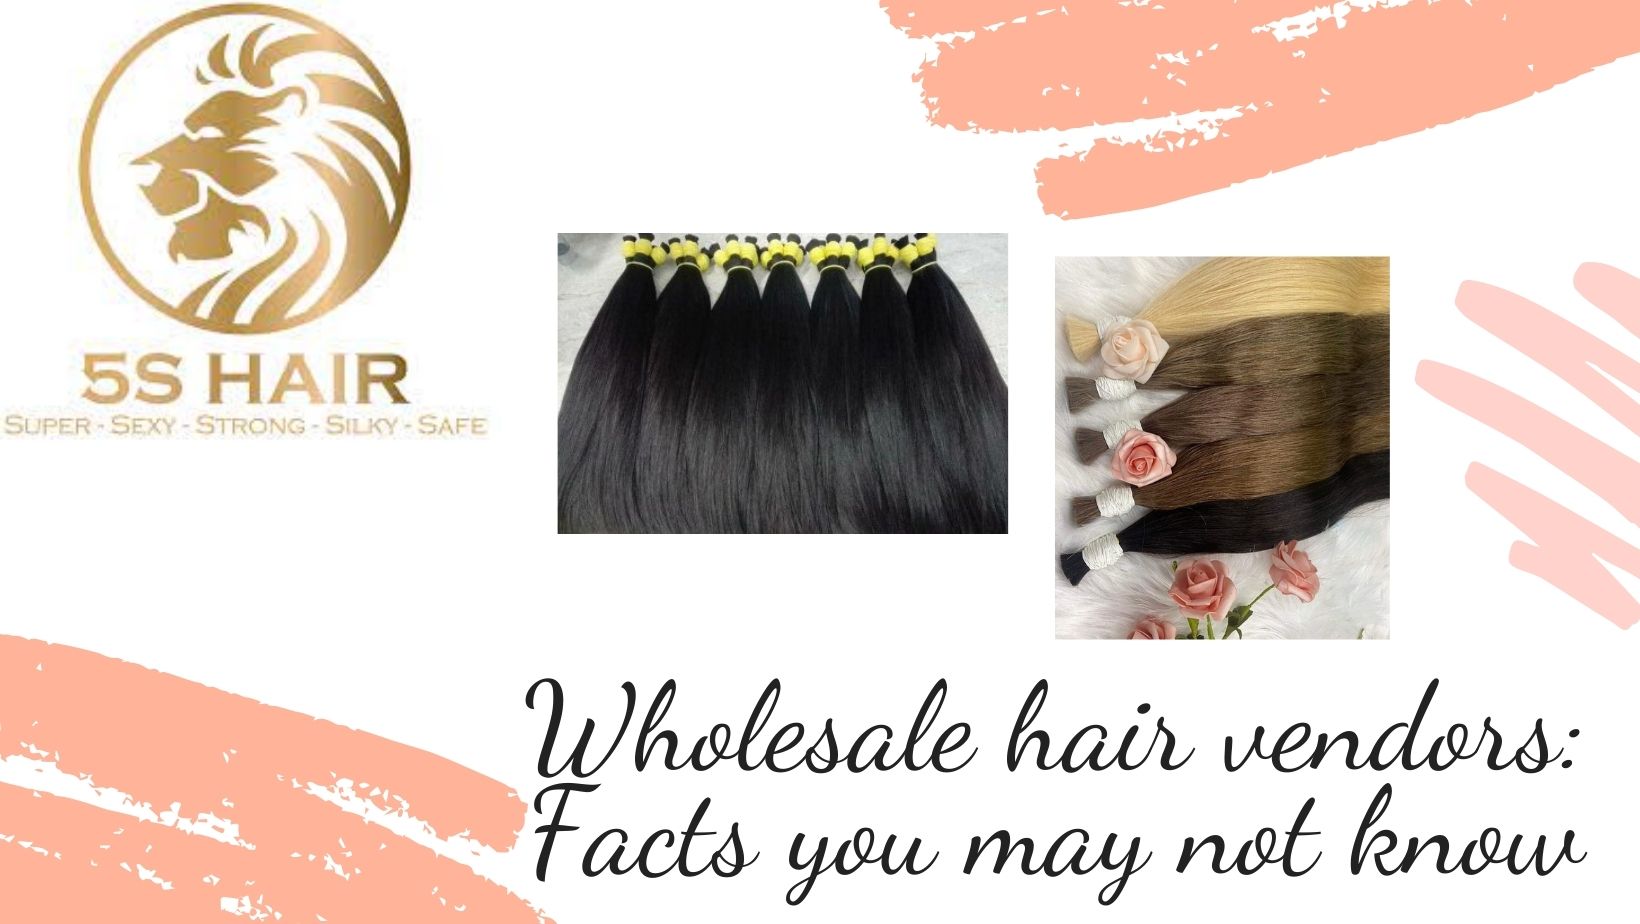 Useful information about wholesale hair vendors